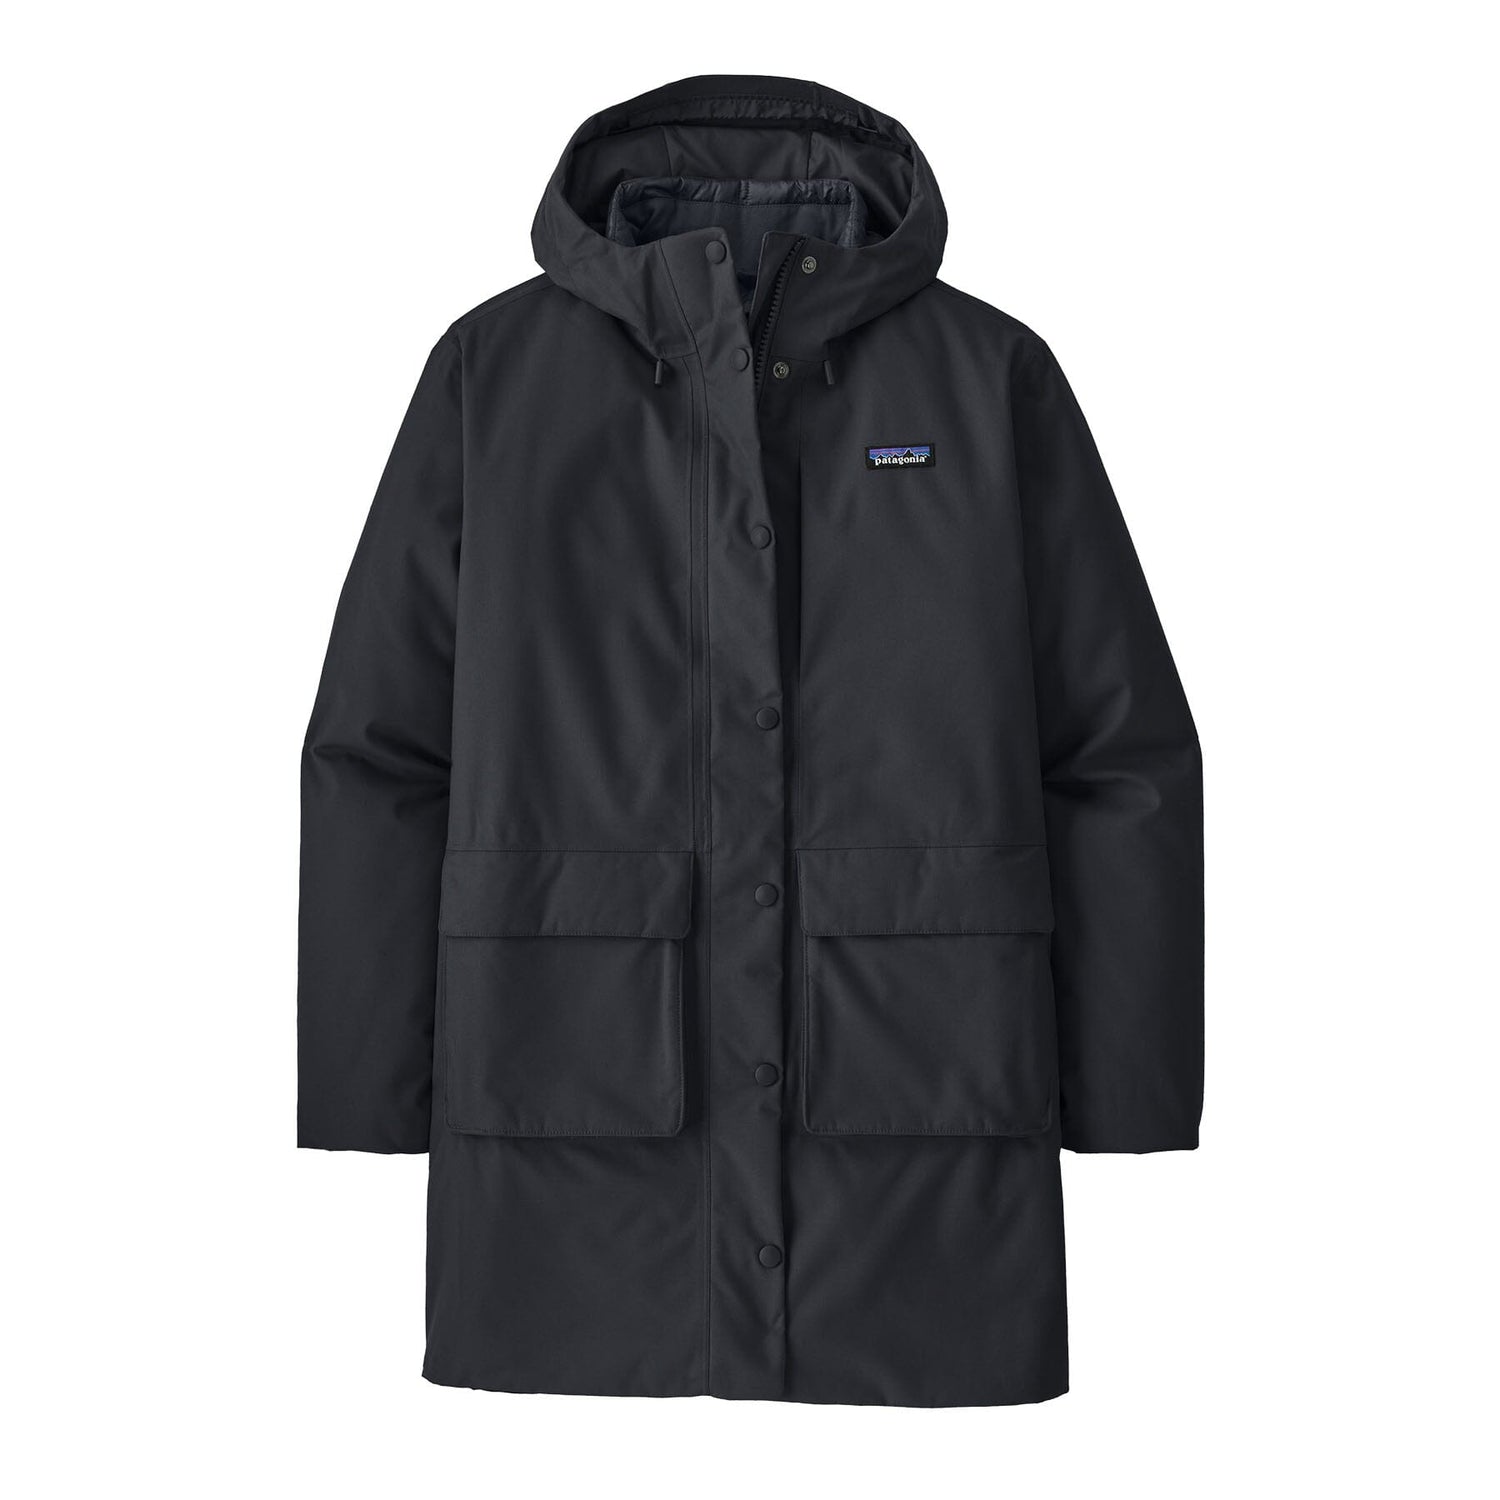 Patagonia - W's Pine Bank 3-in-1 Parka - 100% Recycled Polyester - Weekendbee - sustainable sportswear